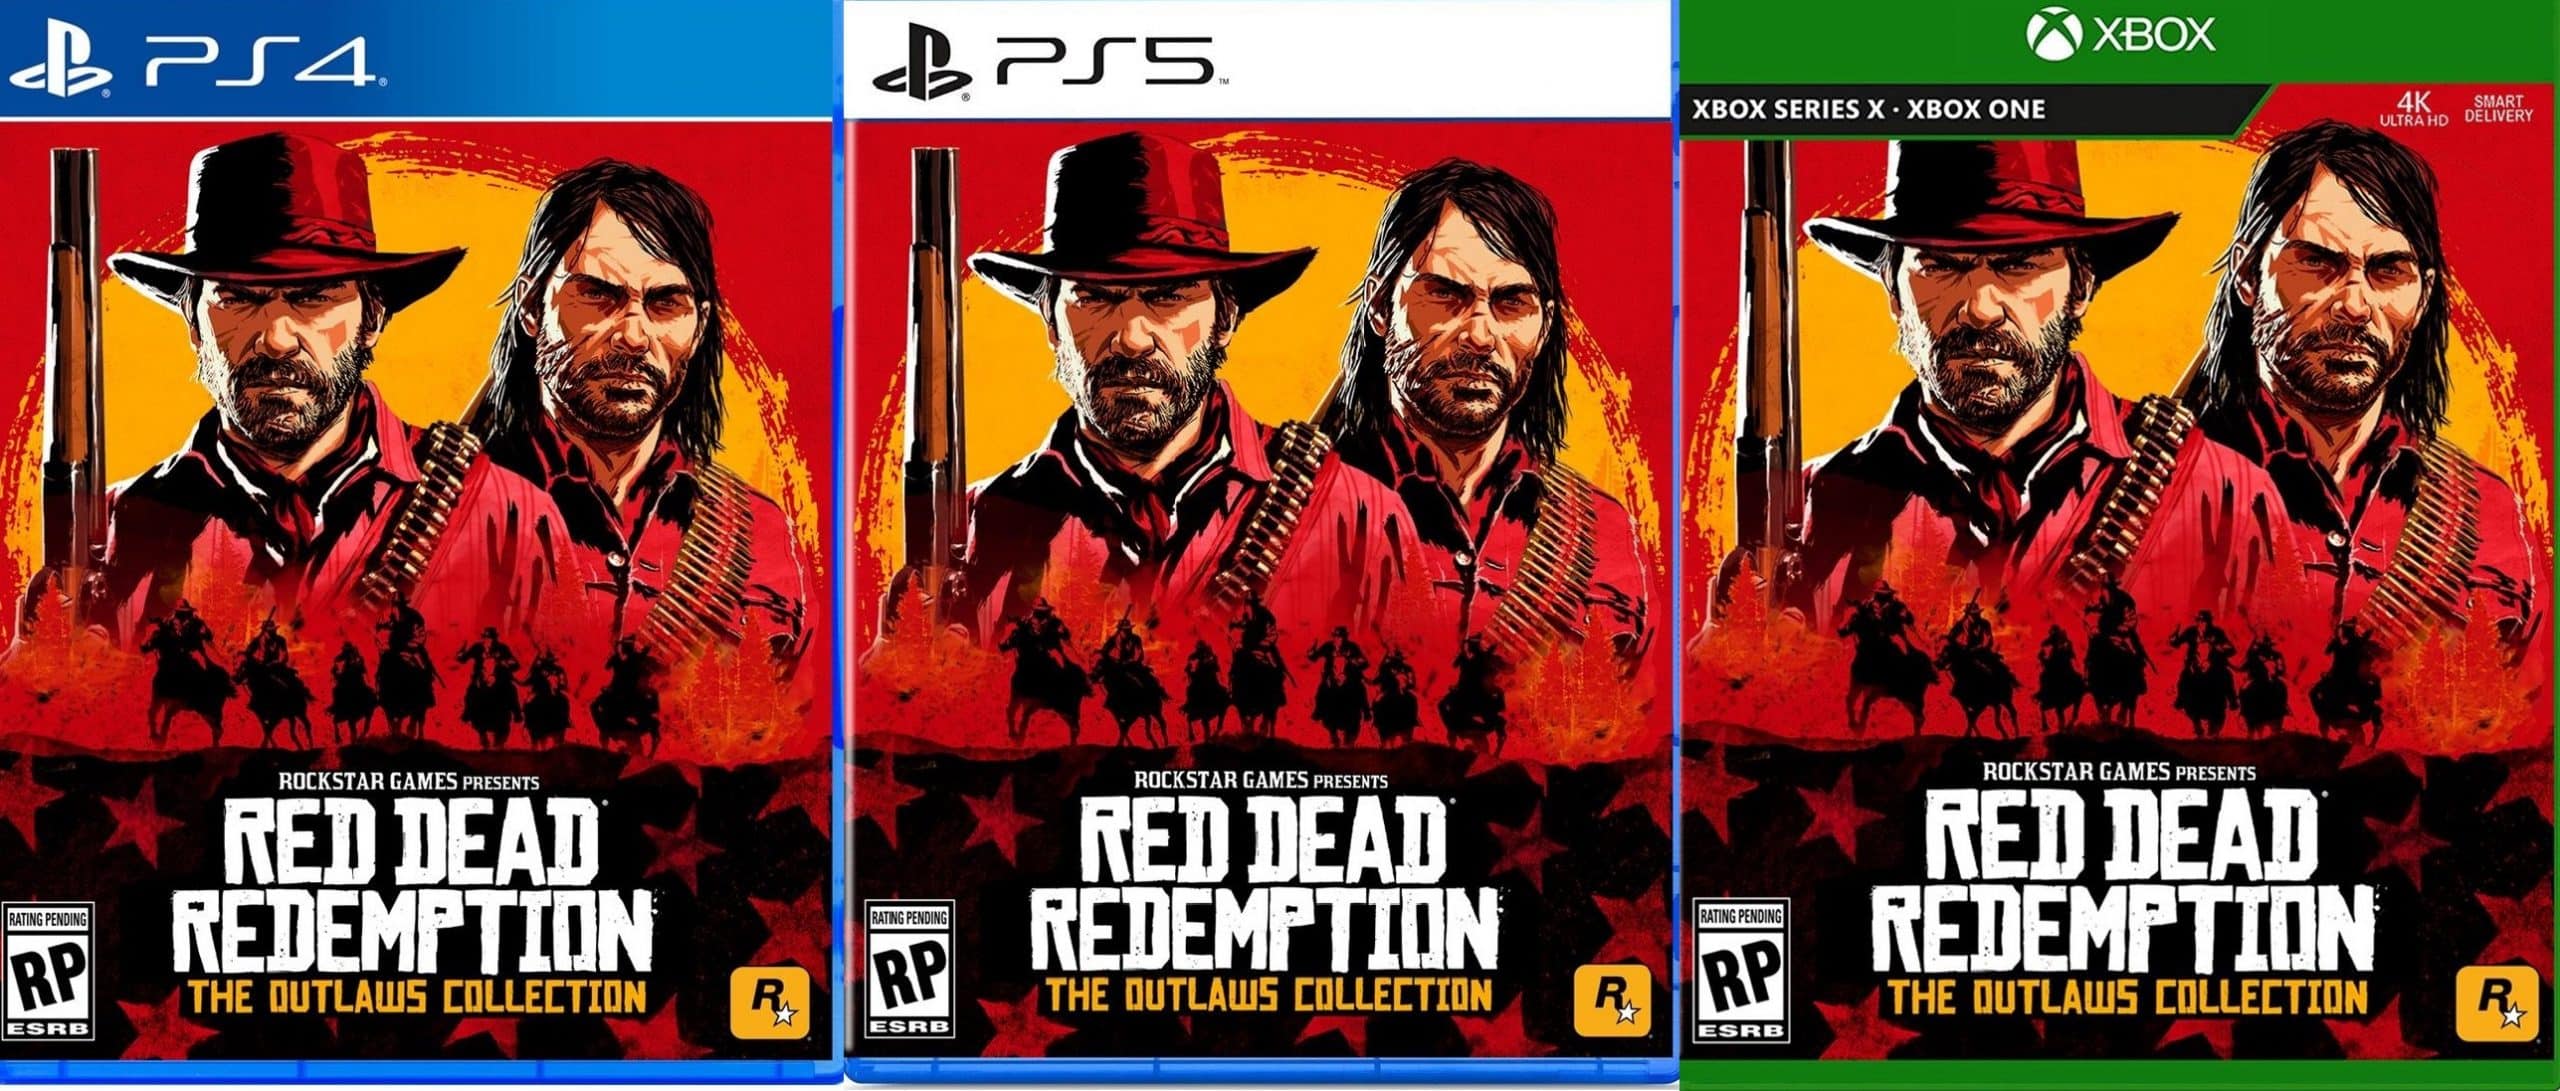 Red dead redemption на ps5. Rdr 2 Xbox one. Xbox one Red Dead Redemption 2. Red Dead Redemption 1. Red Dead Redemption 2 Xbox.